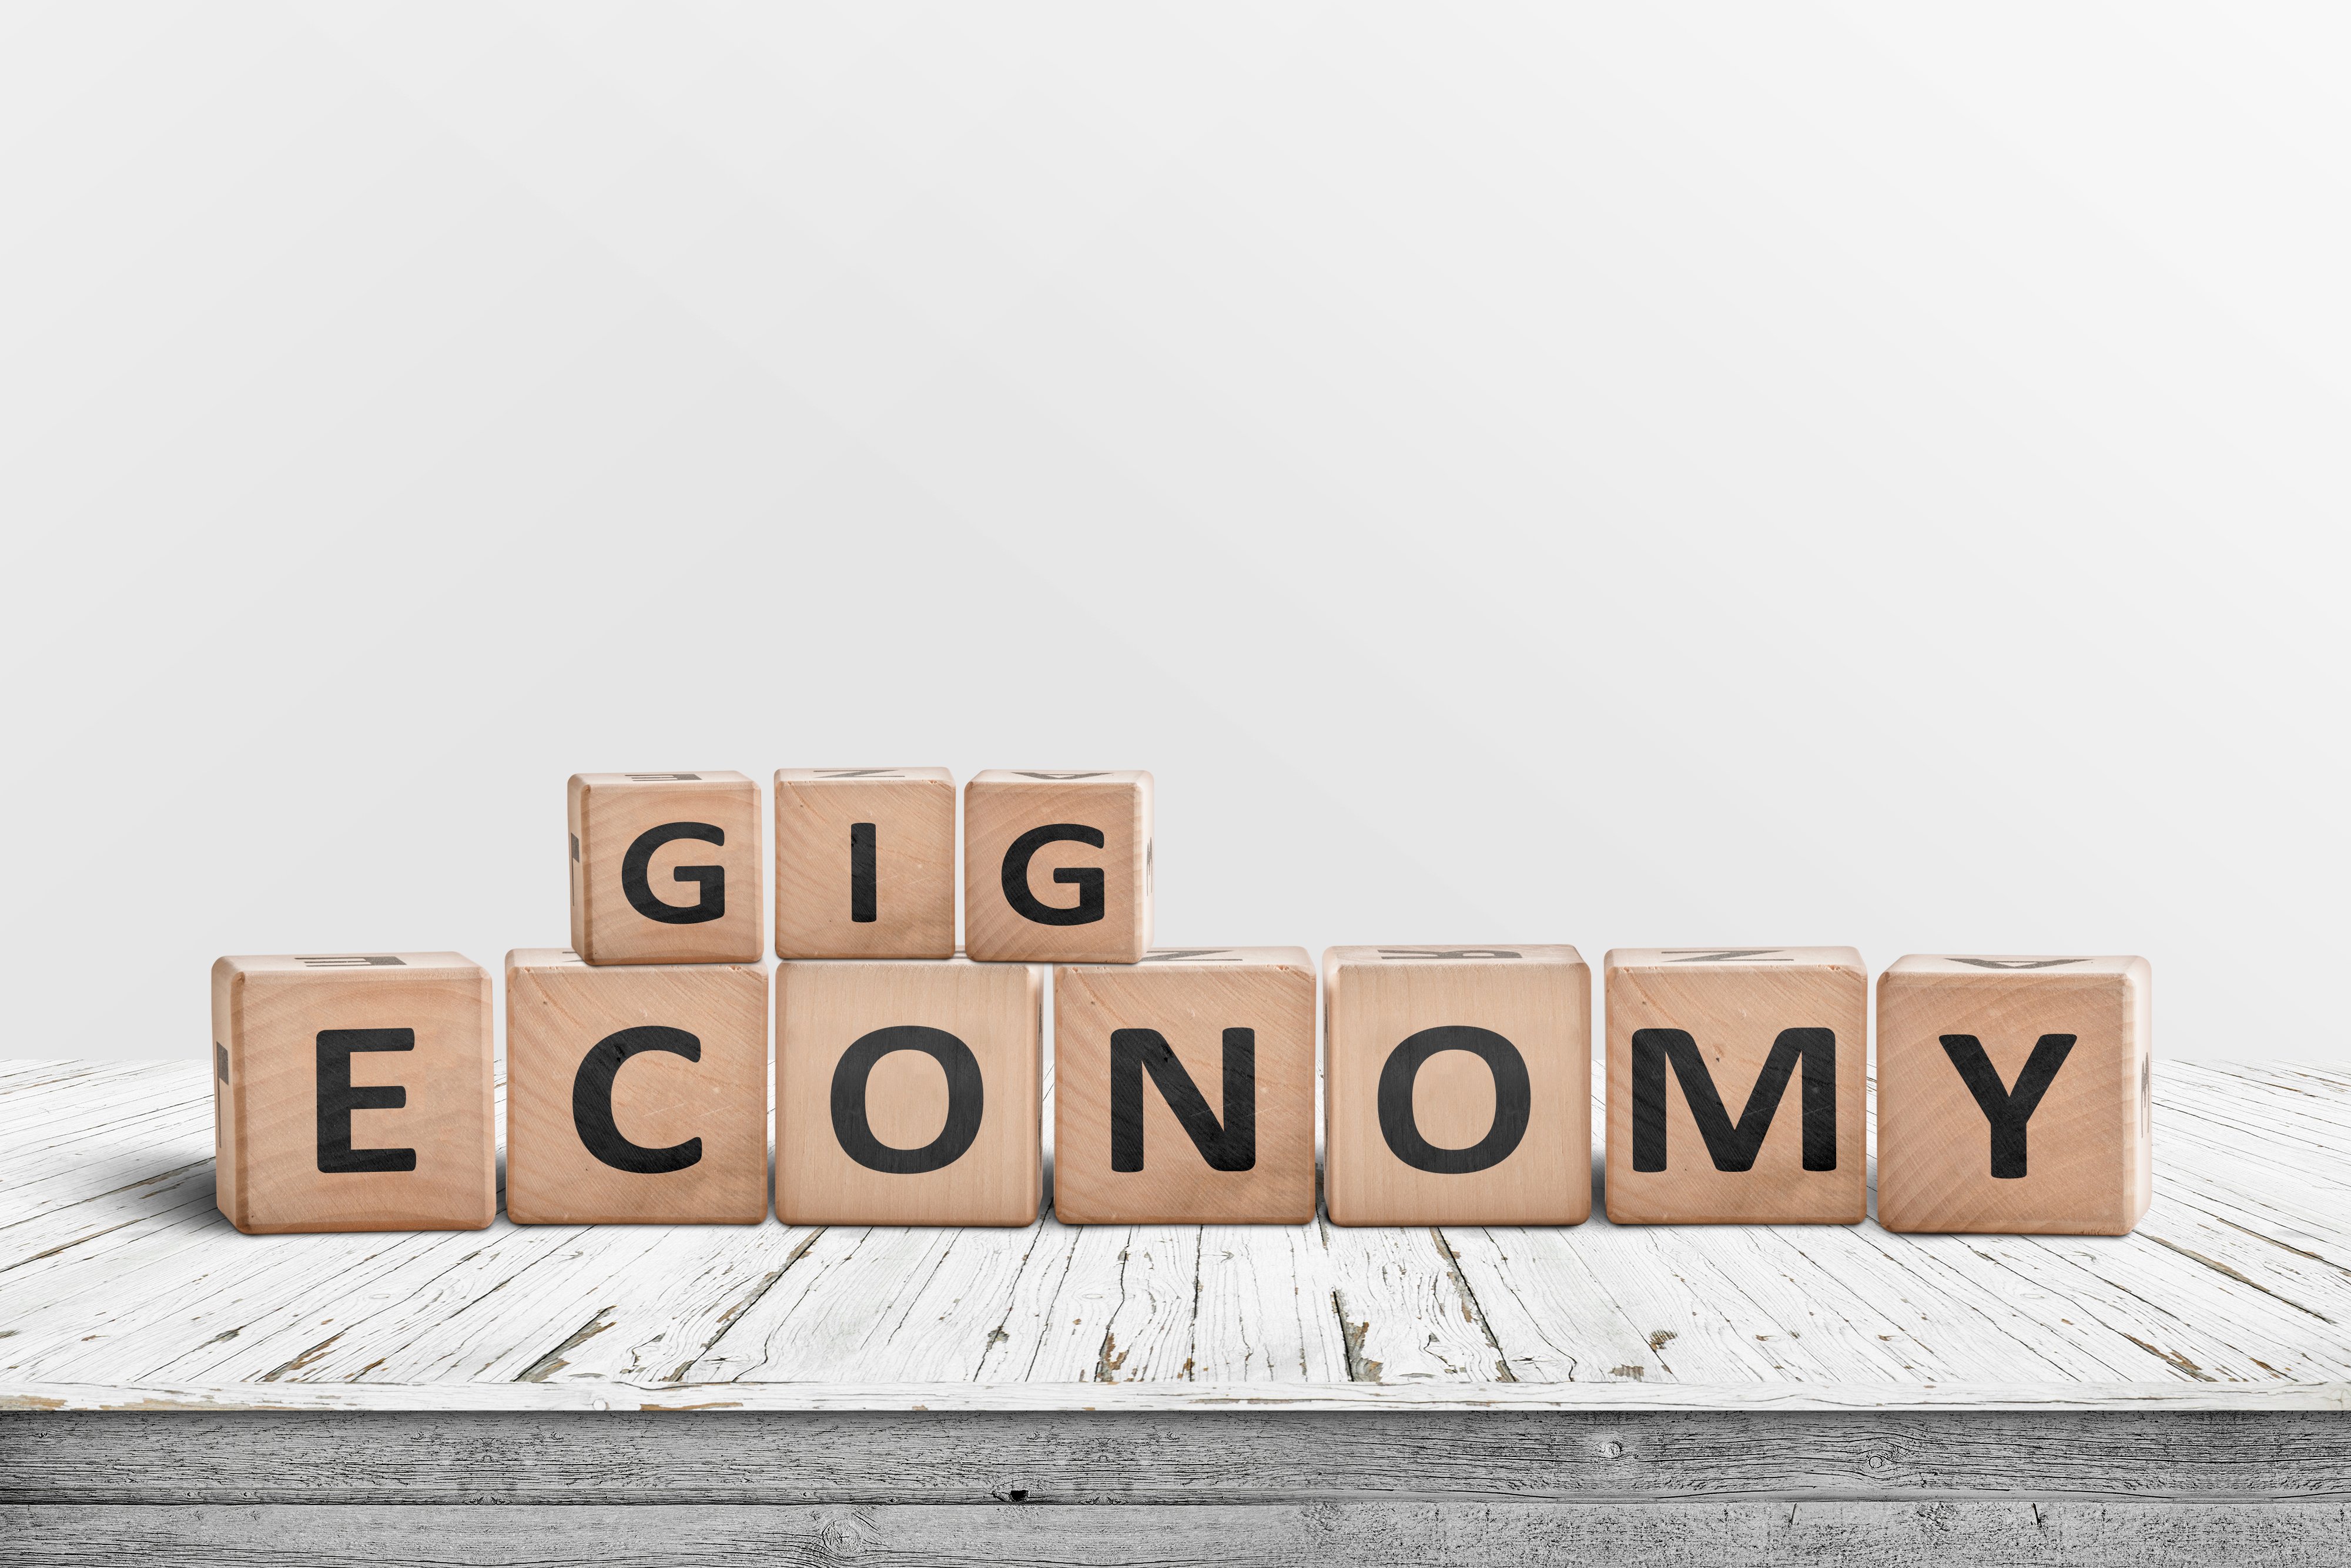 Gig economy sign made of wood on a worn table